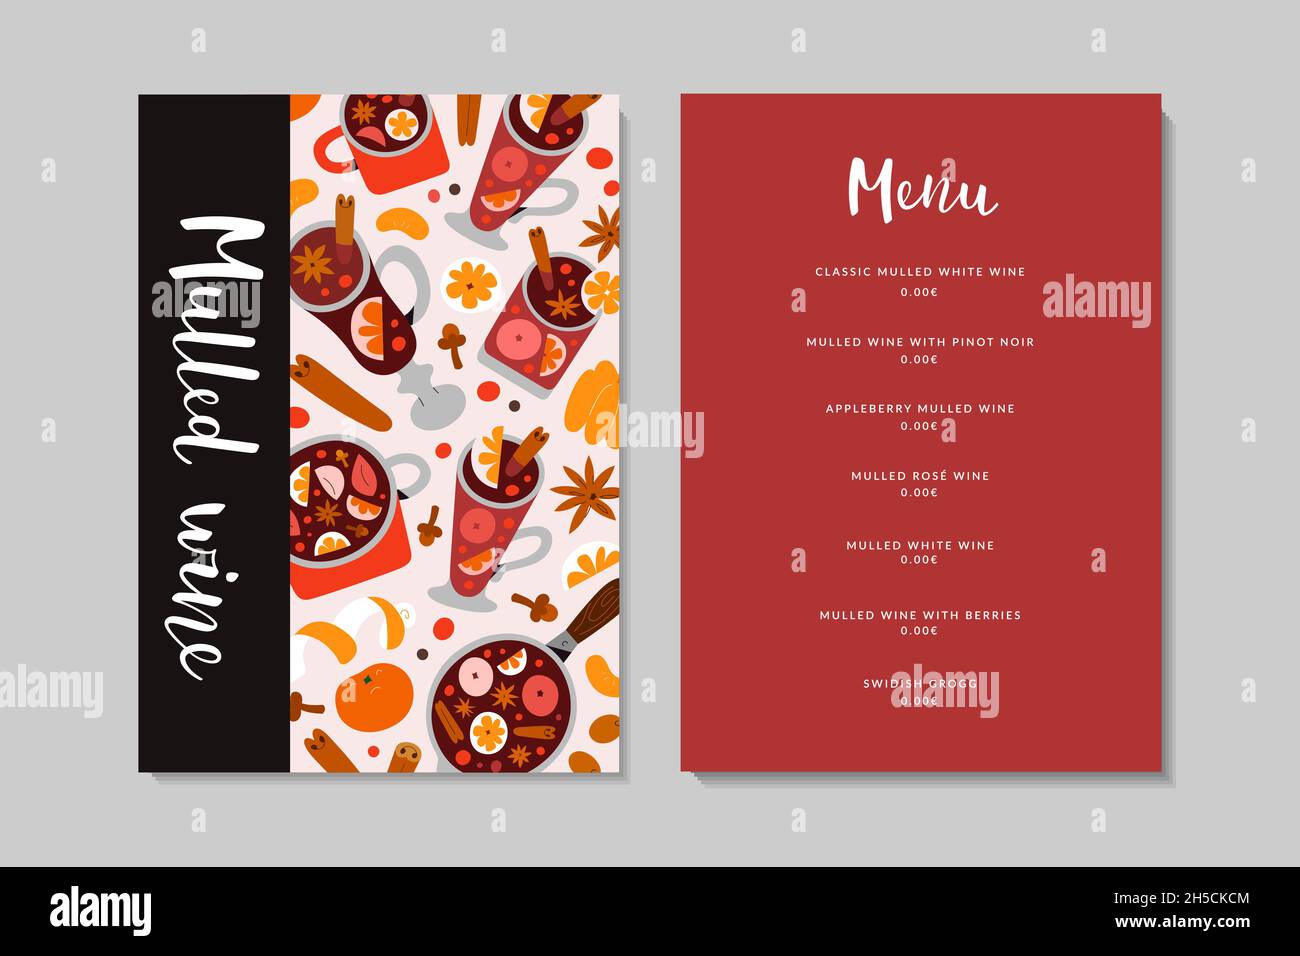 Mulled wine menu card template with price, hot spiced seasonal alcohol drinks, wine list, menu layout with illustrations, design concept Stock Vector